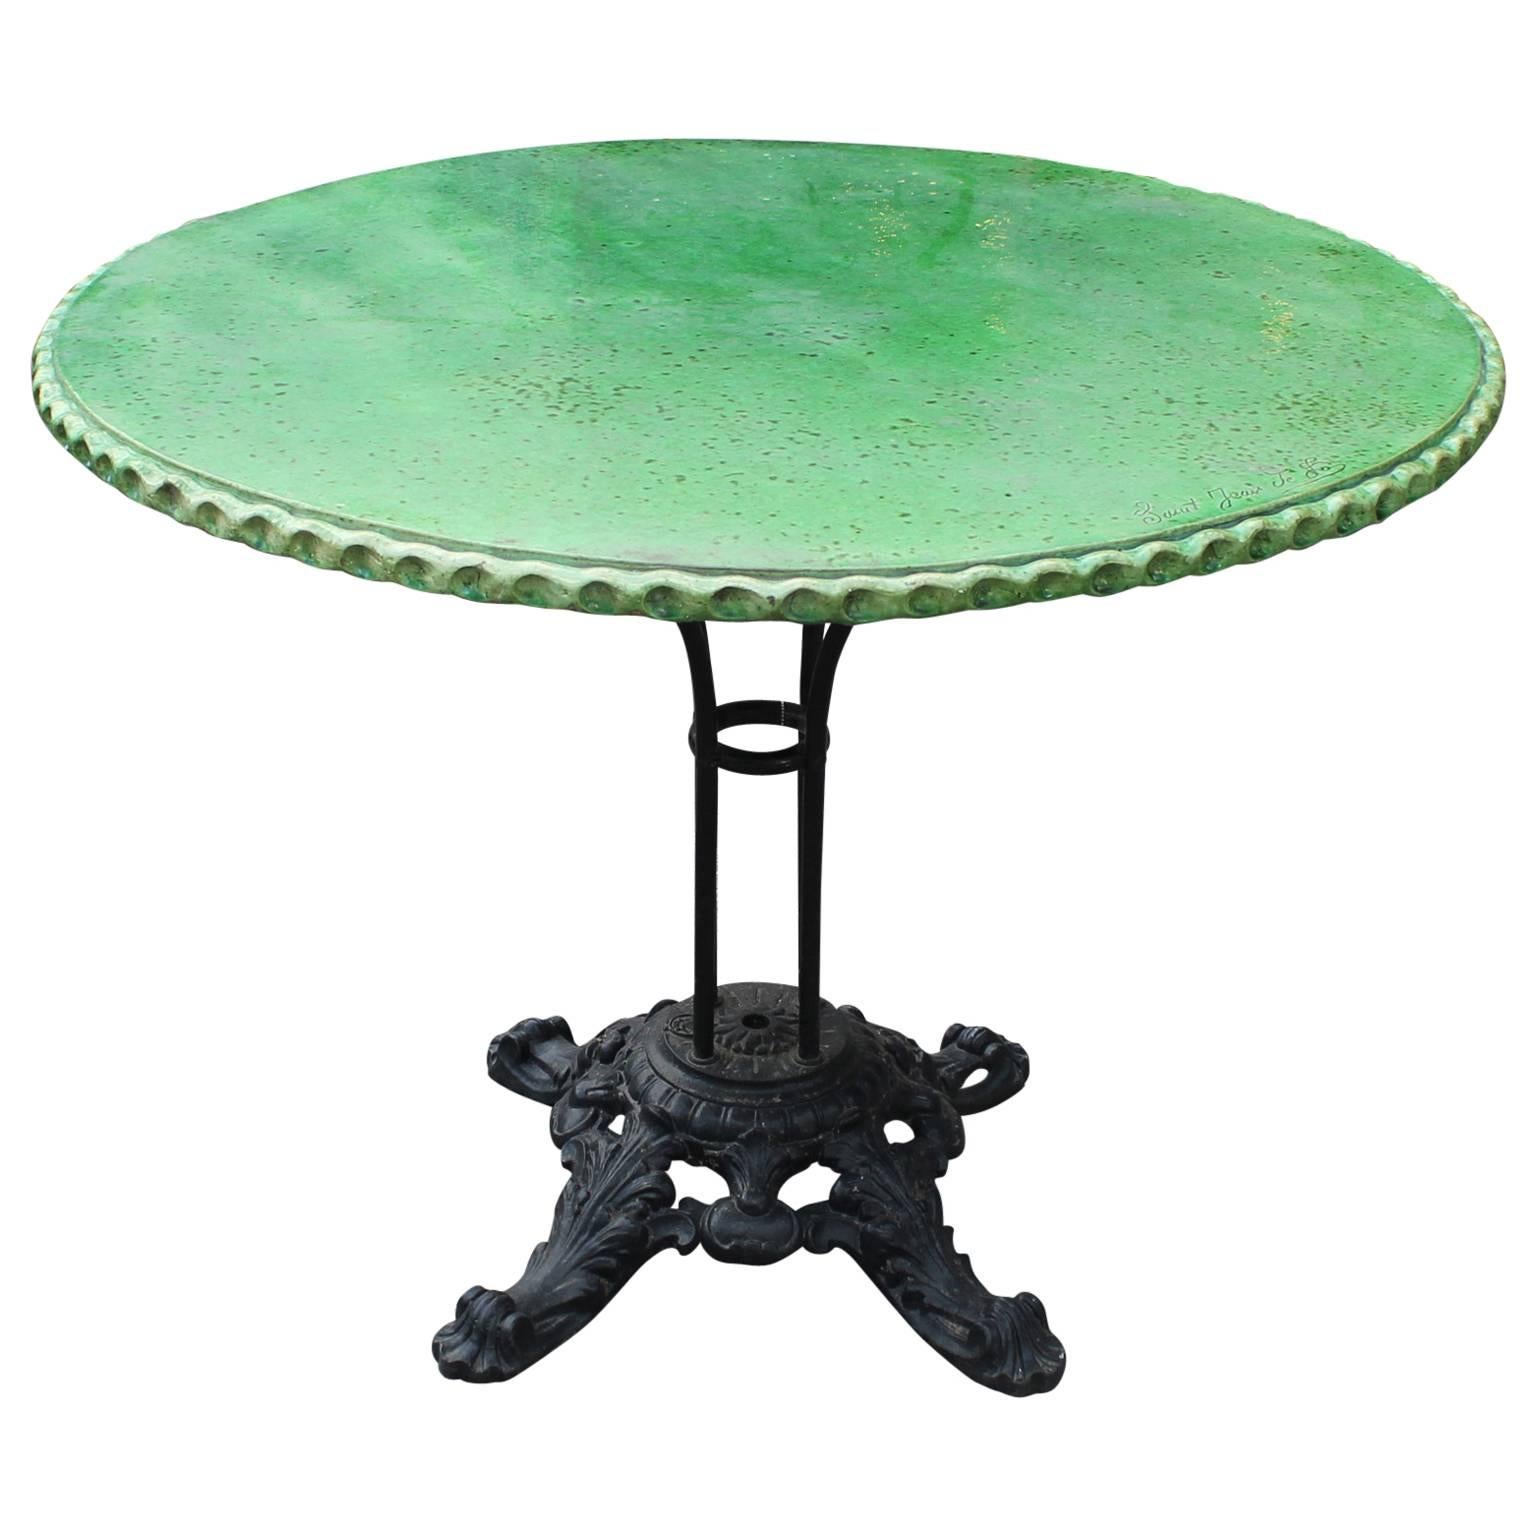 Stunning Louis Vuitton French Garden Table Topped with Green Ceramic